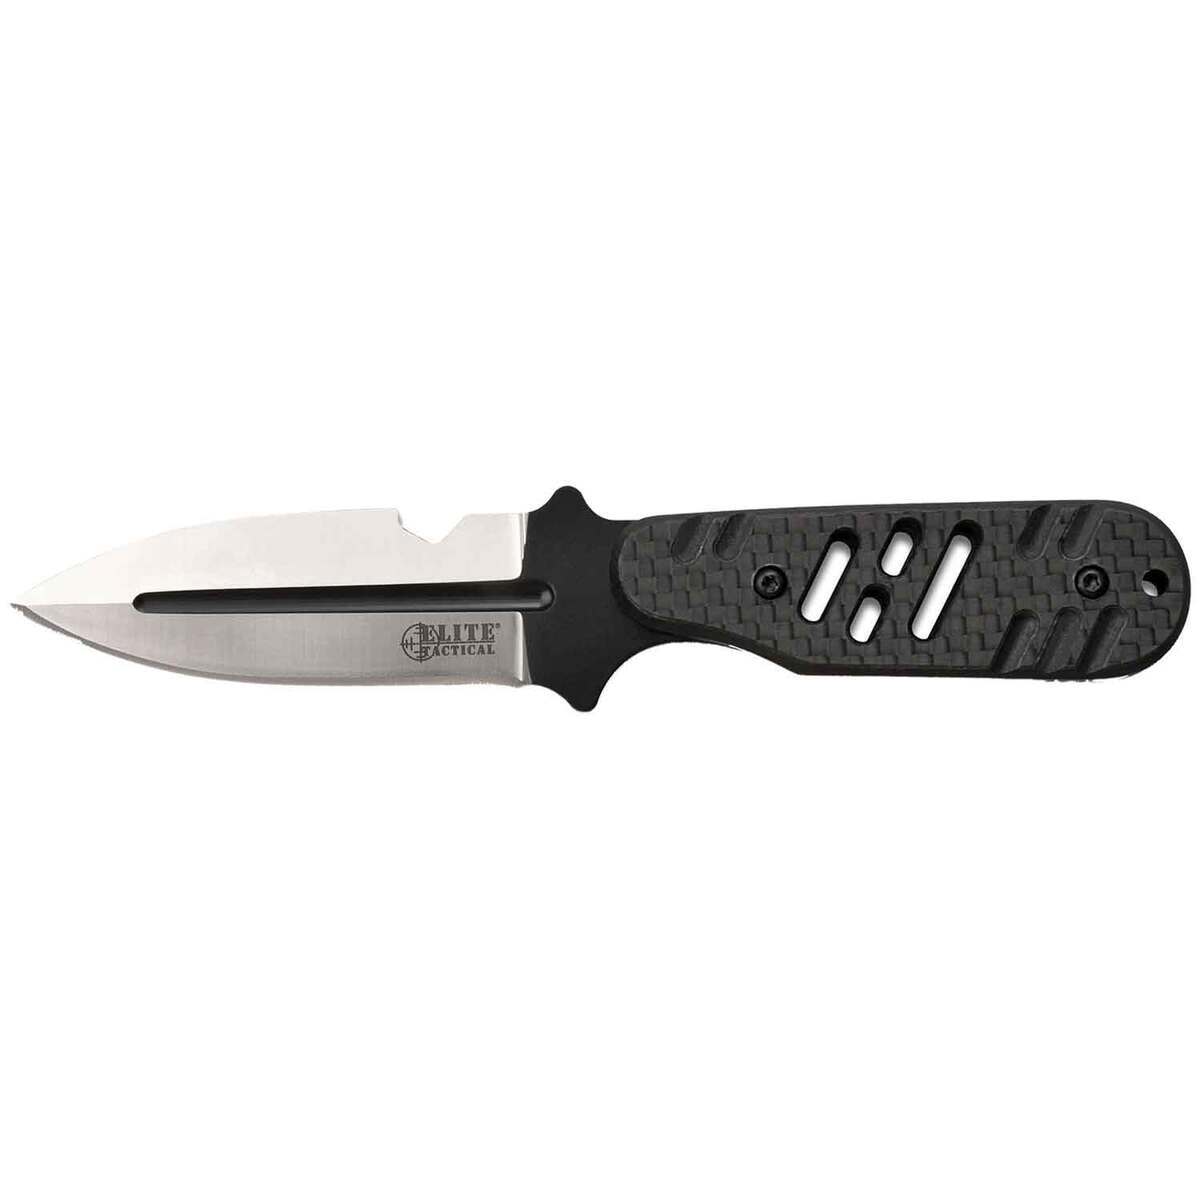 Elite Tactical Minion 2.75 inch Fixed Blade Knife | Sportsman's Warehouse